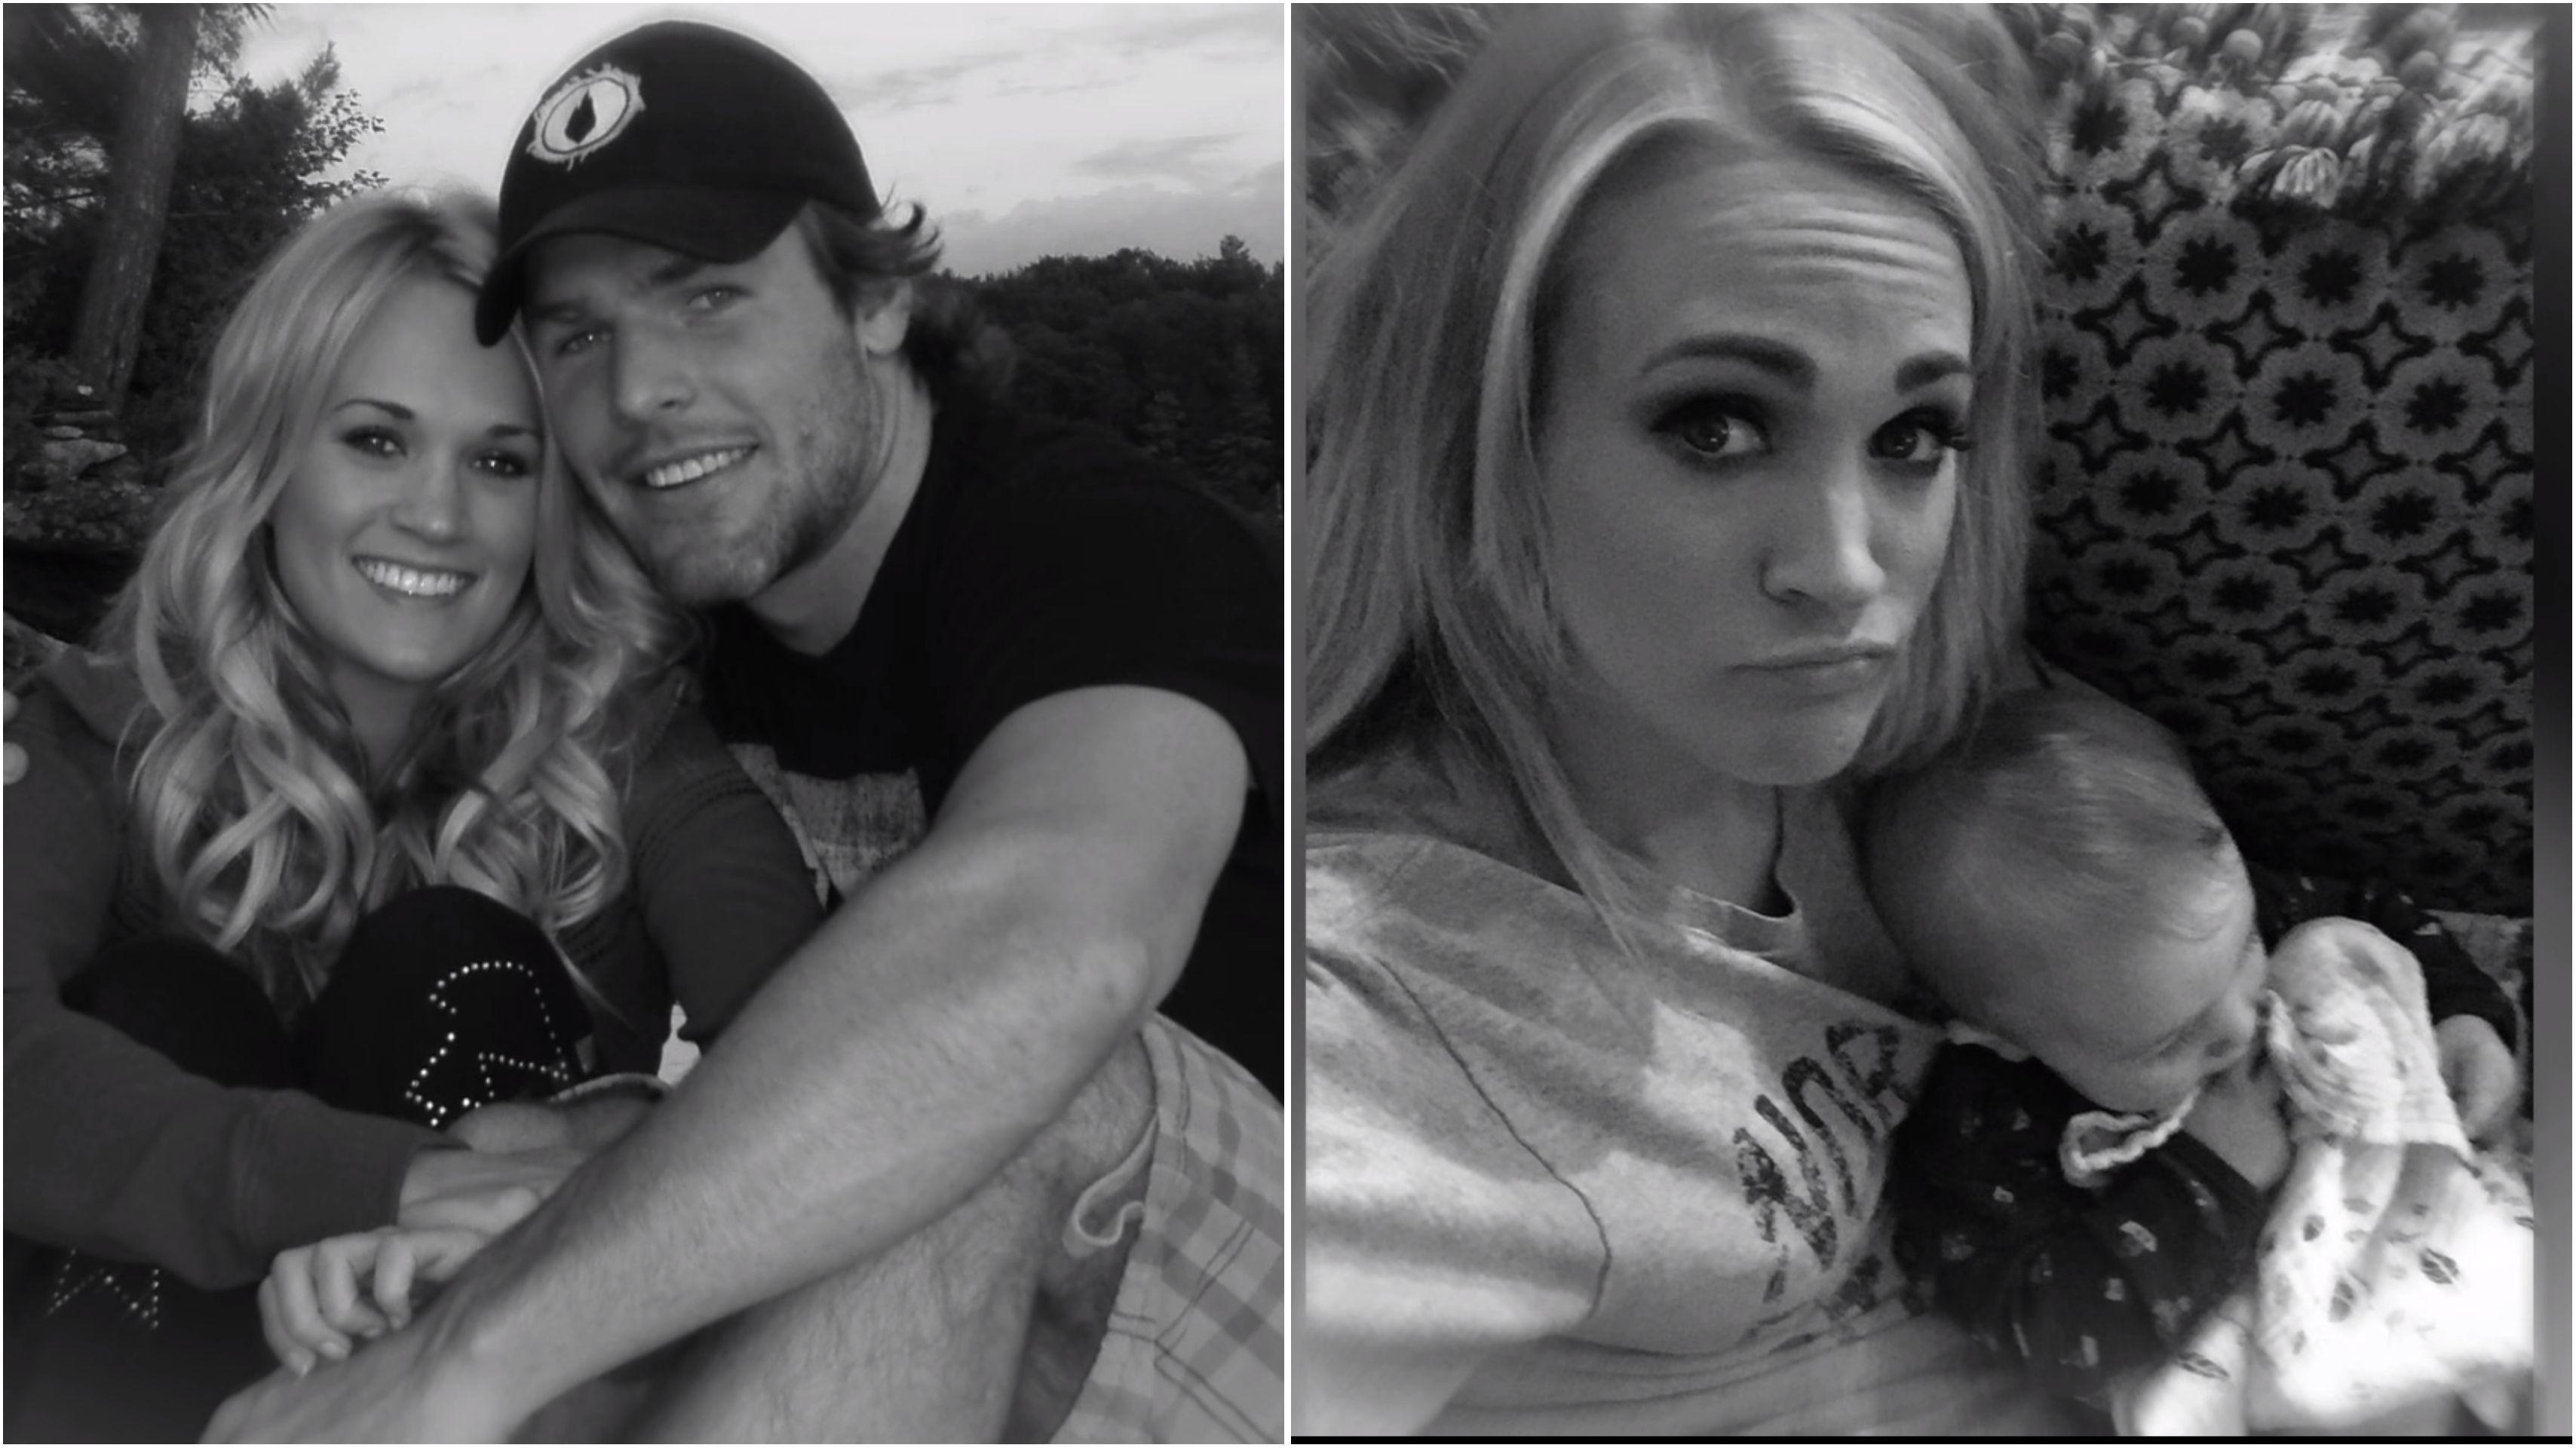 Carrie Underwood Black and White Logo - Carrie Underwood Shares Personal Family Photo in 'What I Never Knew